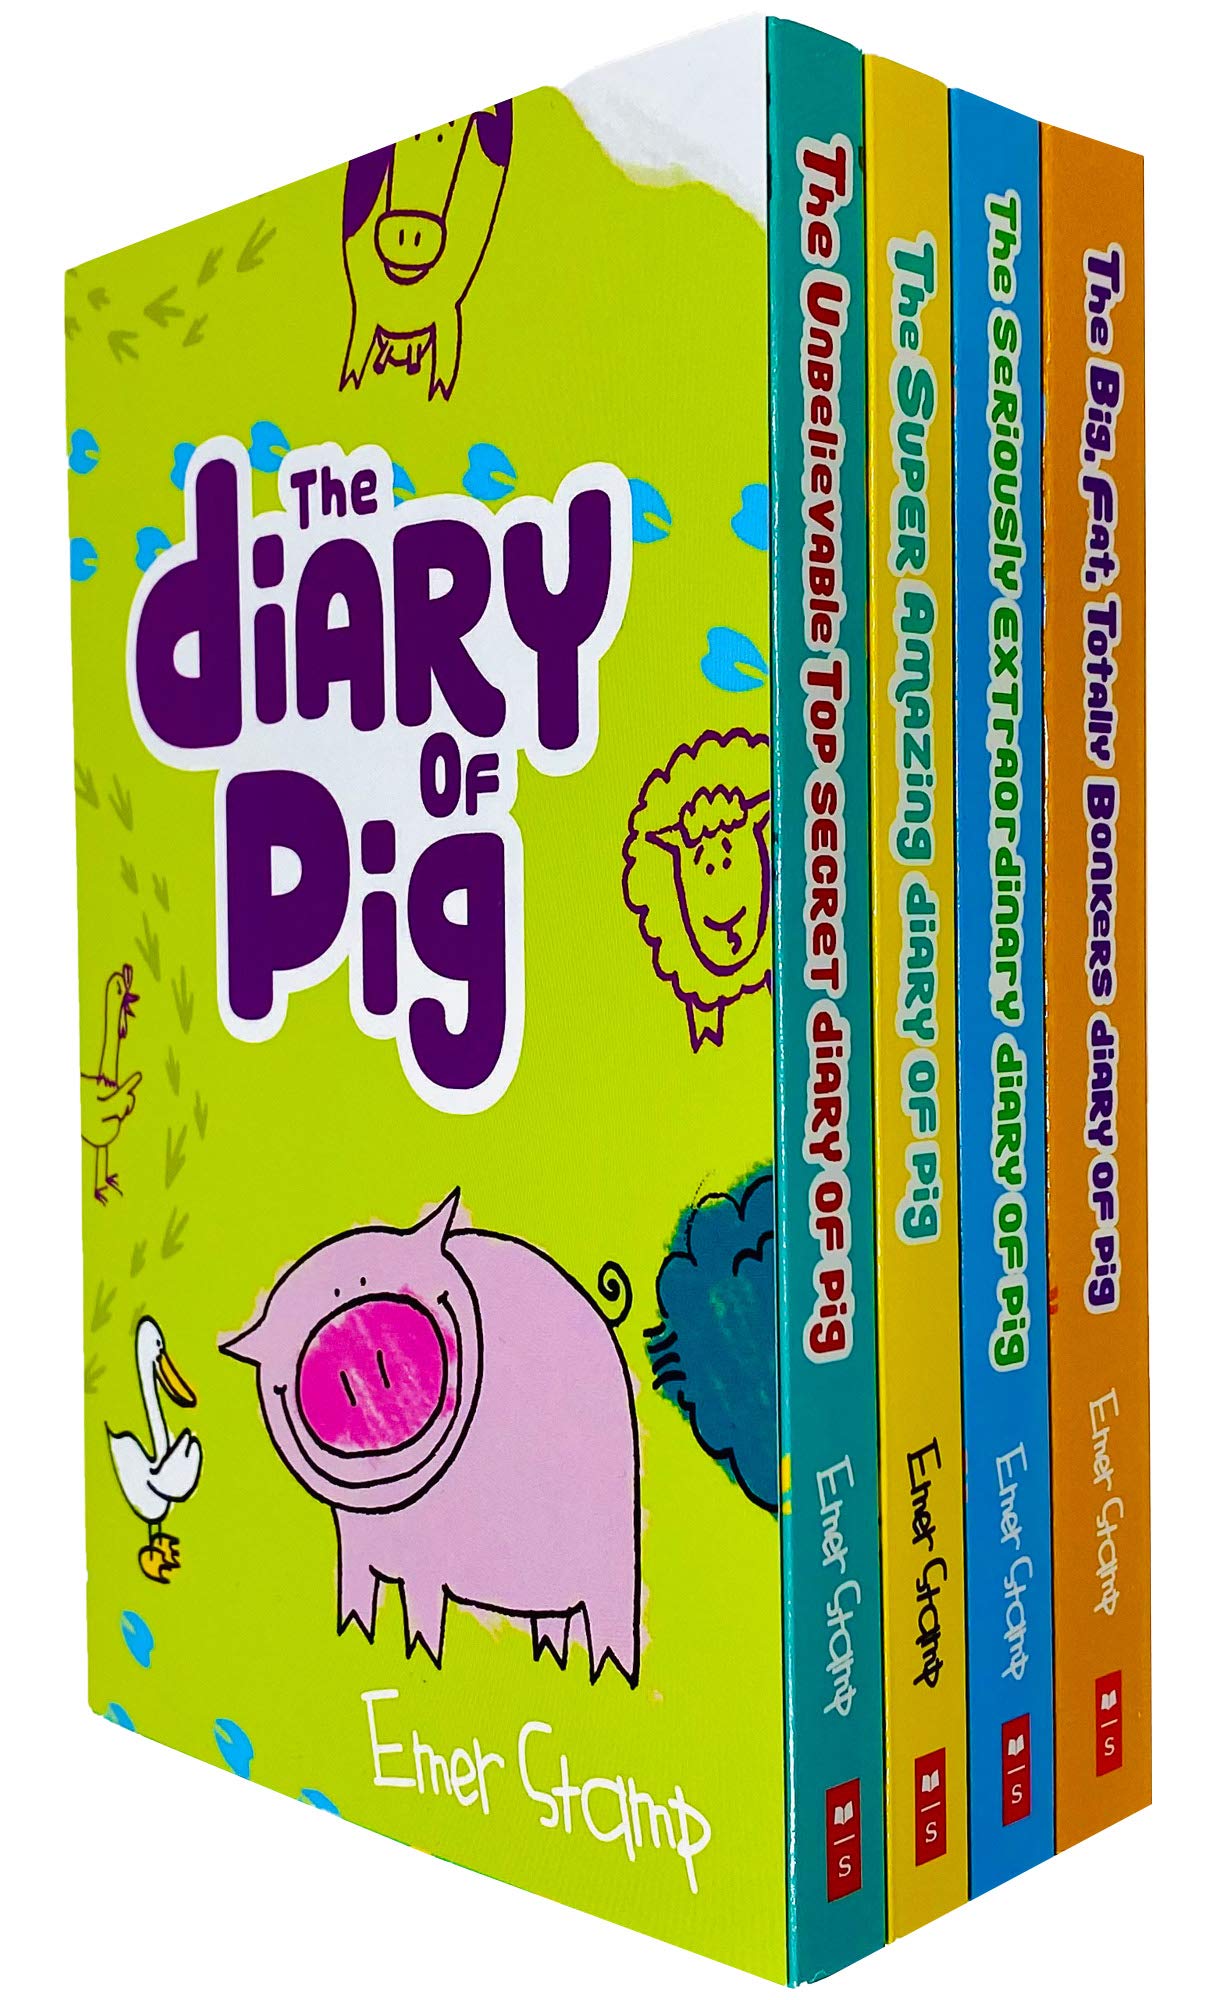 Pig Diary Series 4 Books Collection Set by Emer Stamp Paperback (Seriously Extraordinary) - Lets Buy Books